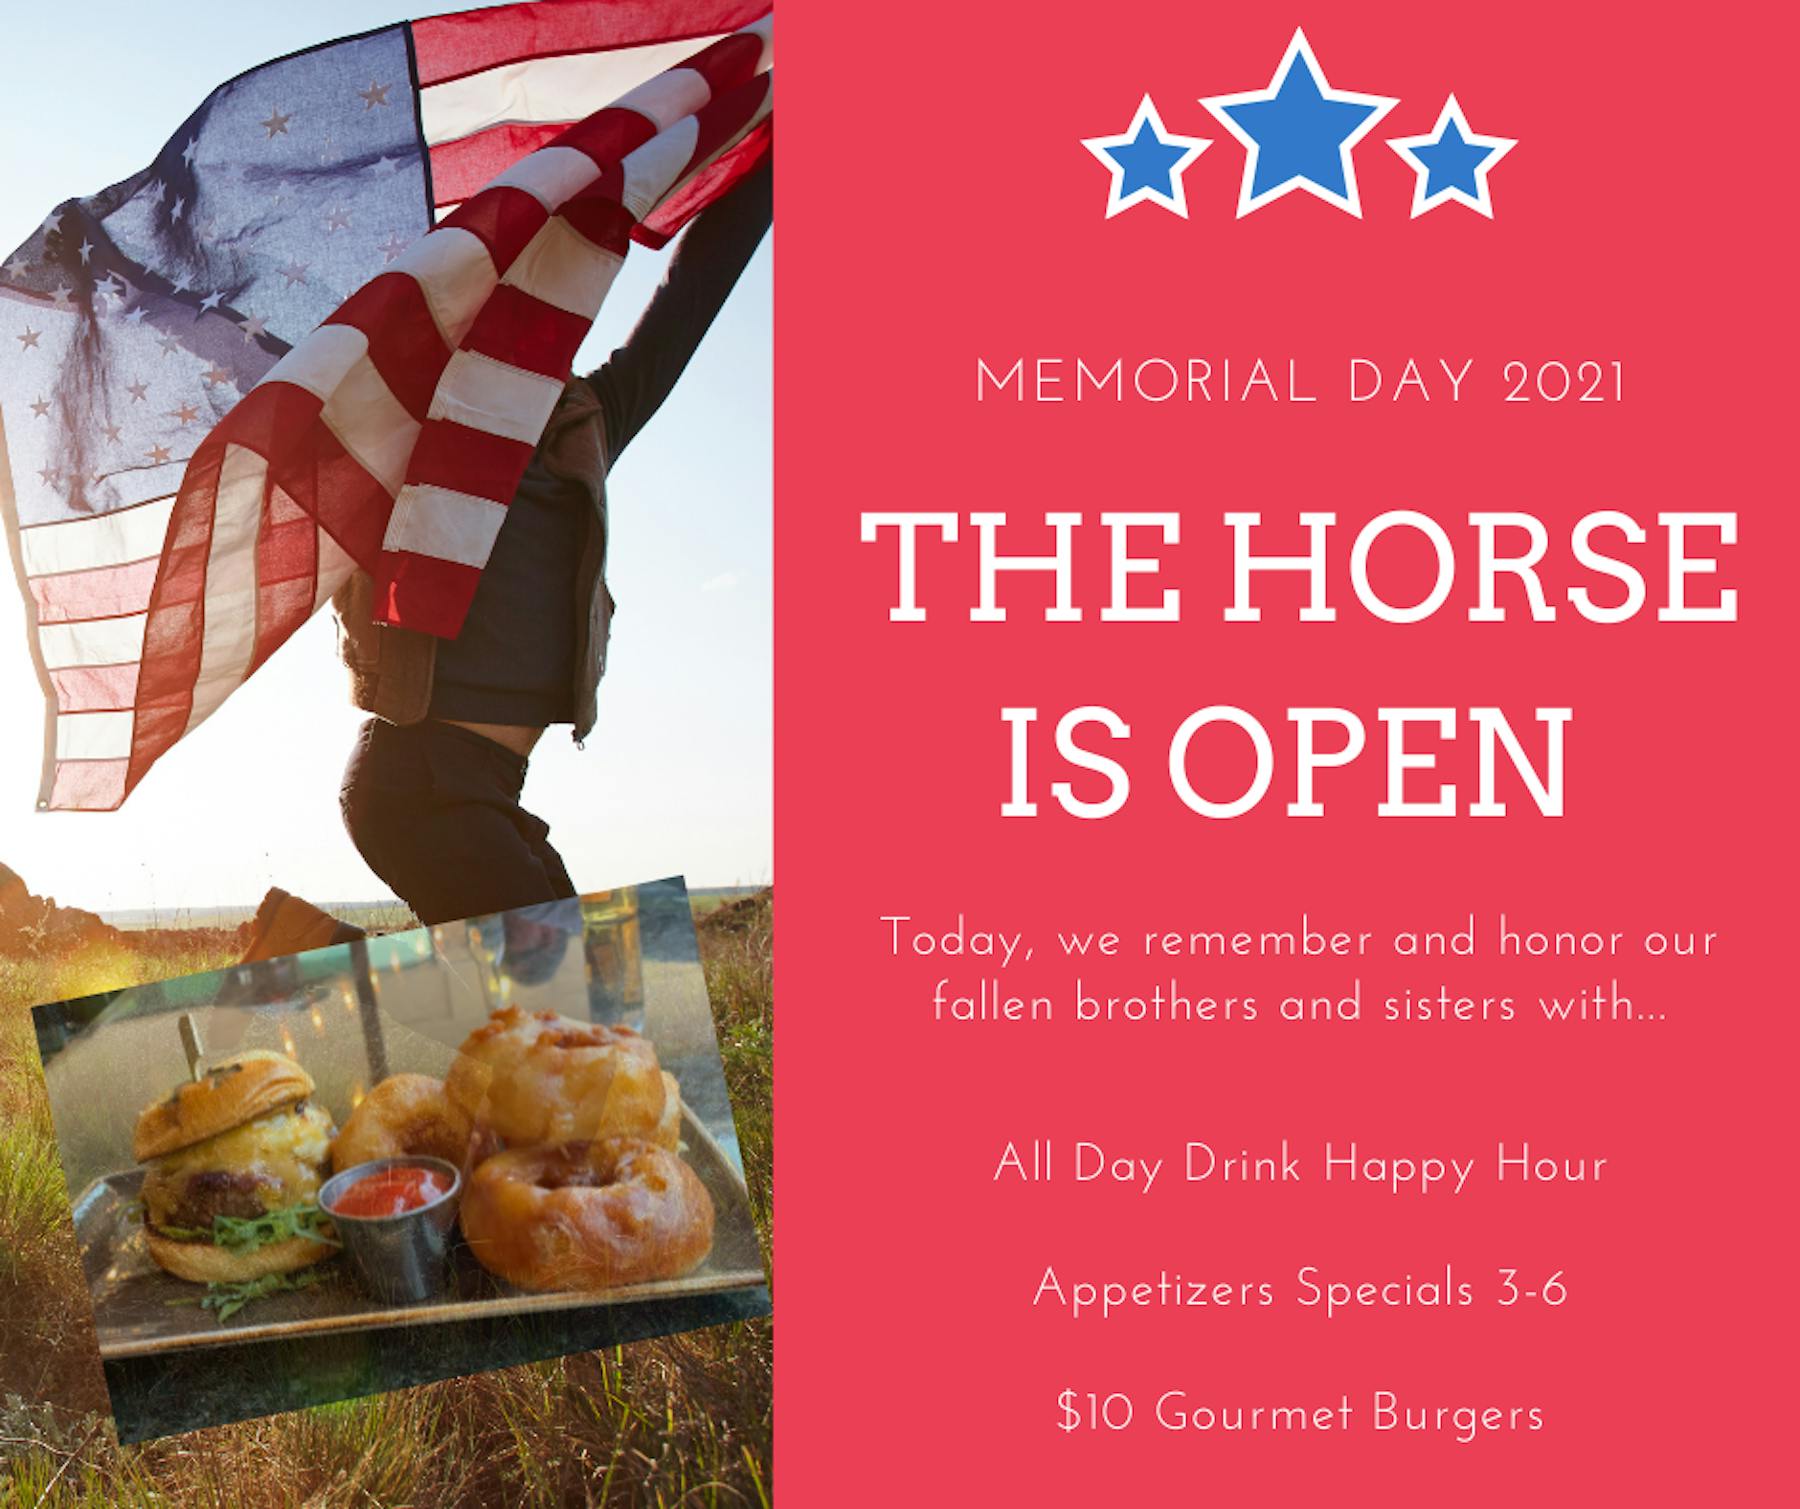 Iron Horse Bar and Grill | American Bar & Grill in Leawood, KS 6624